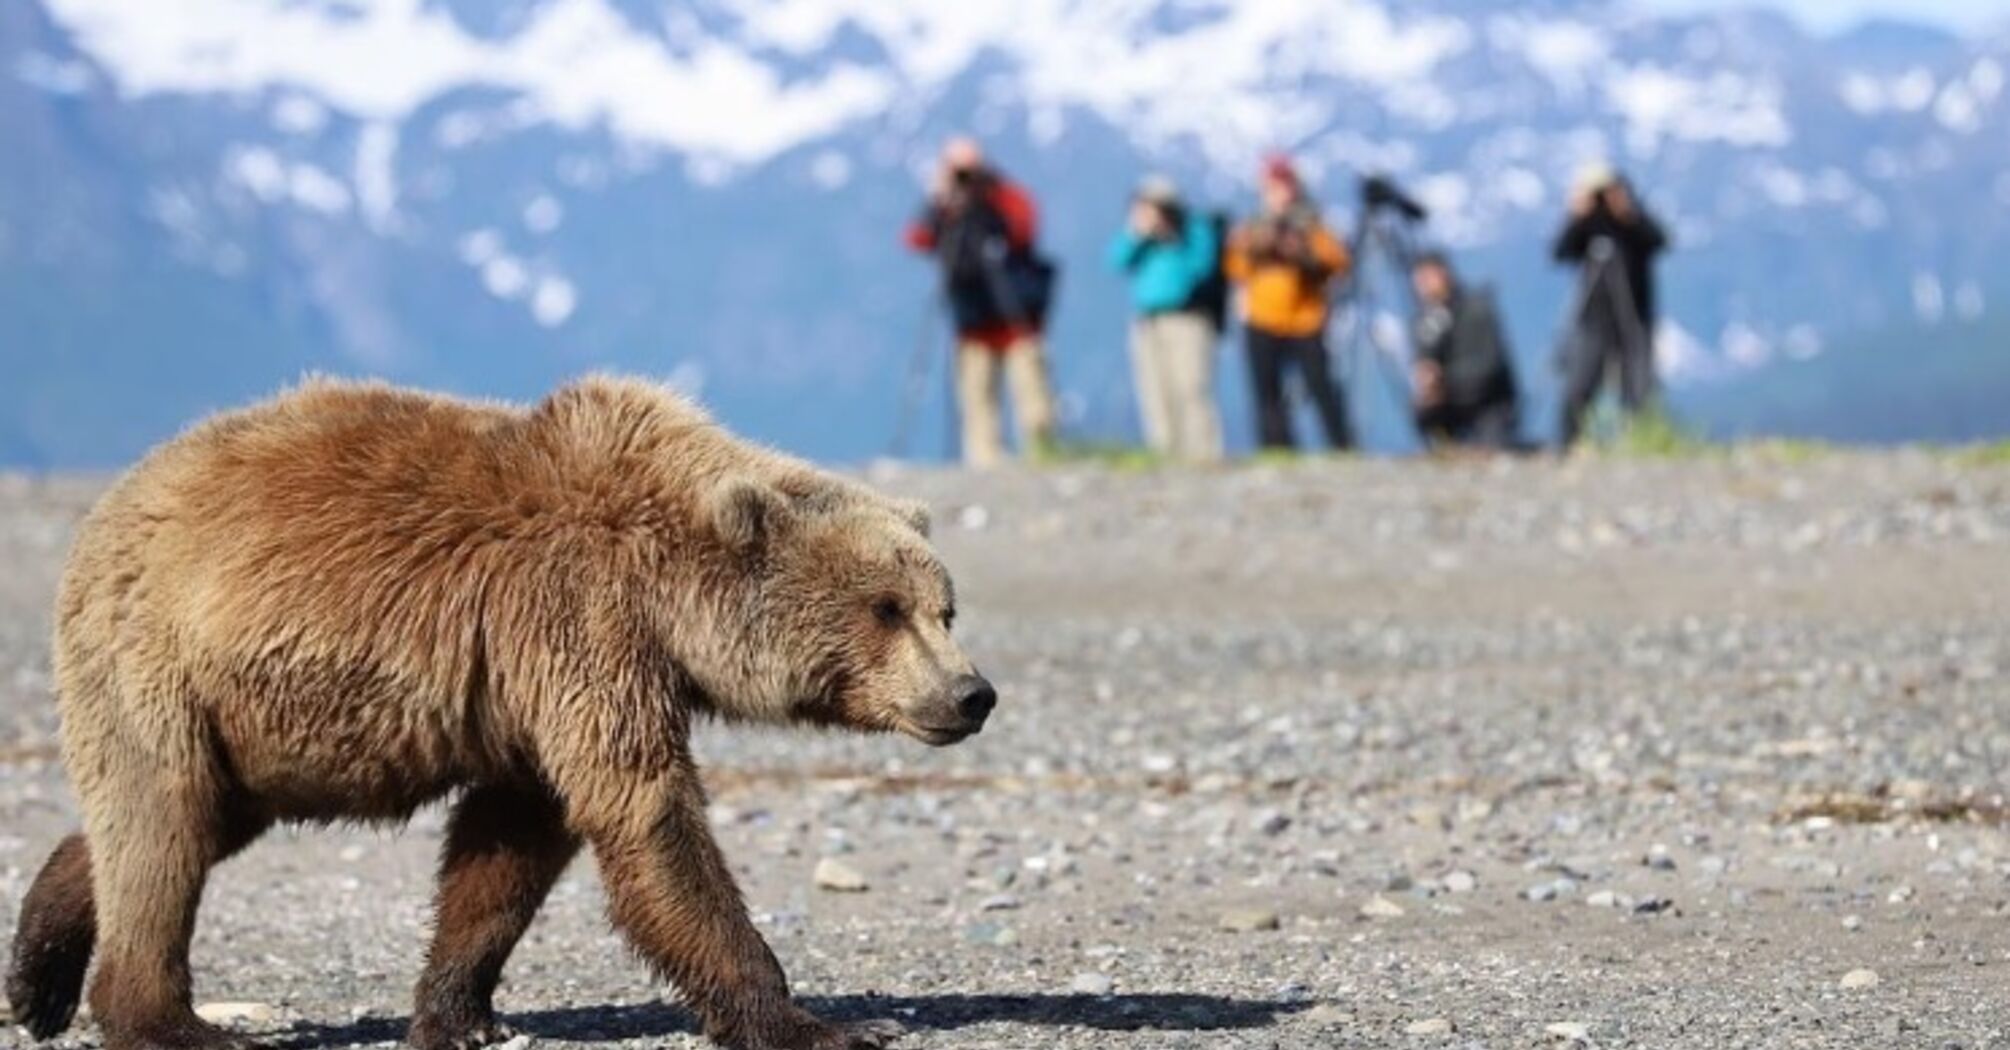 In Alaska, a group of tourists was attacked by a brown bear (eerie footage)